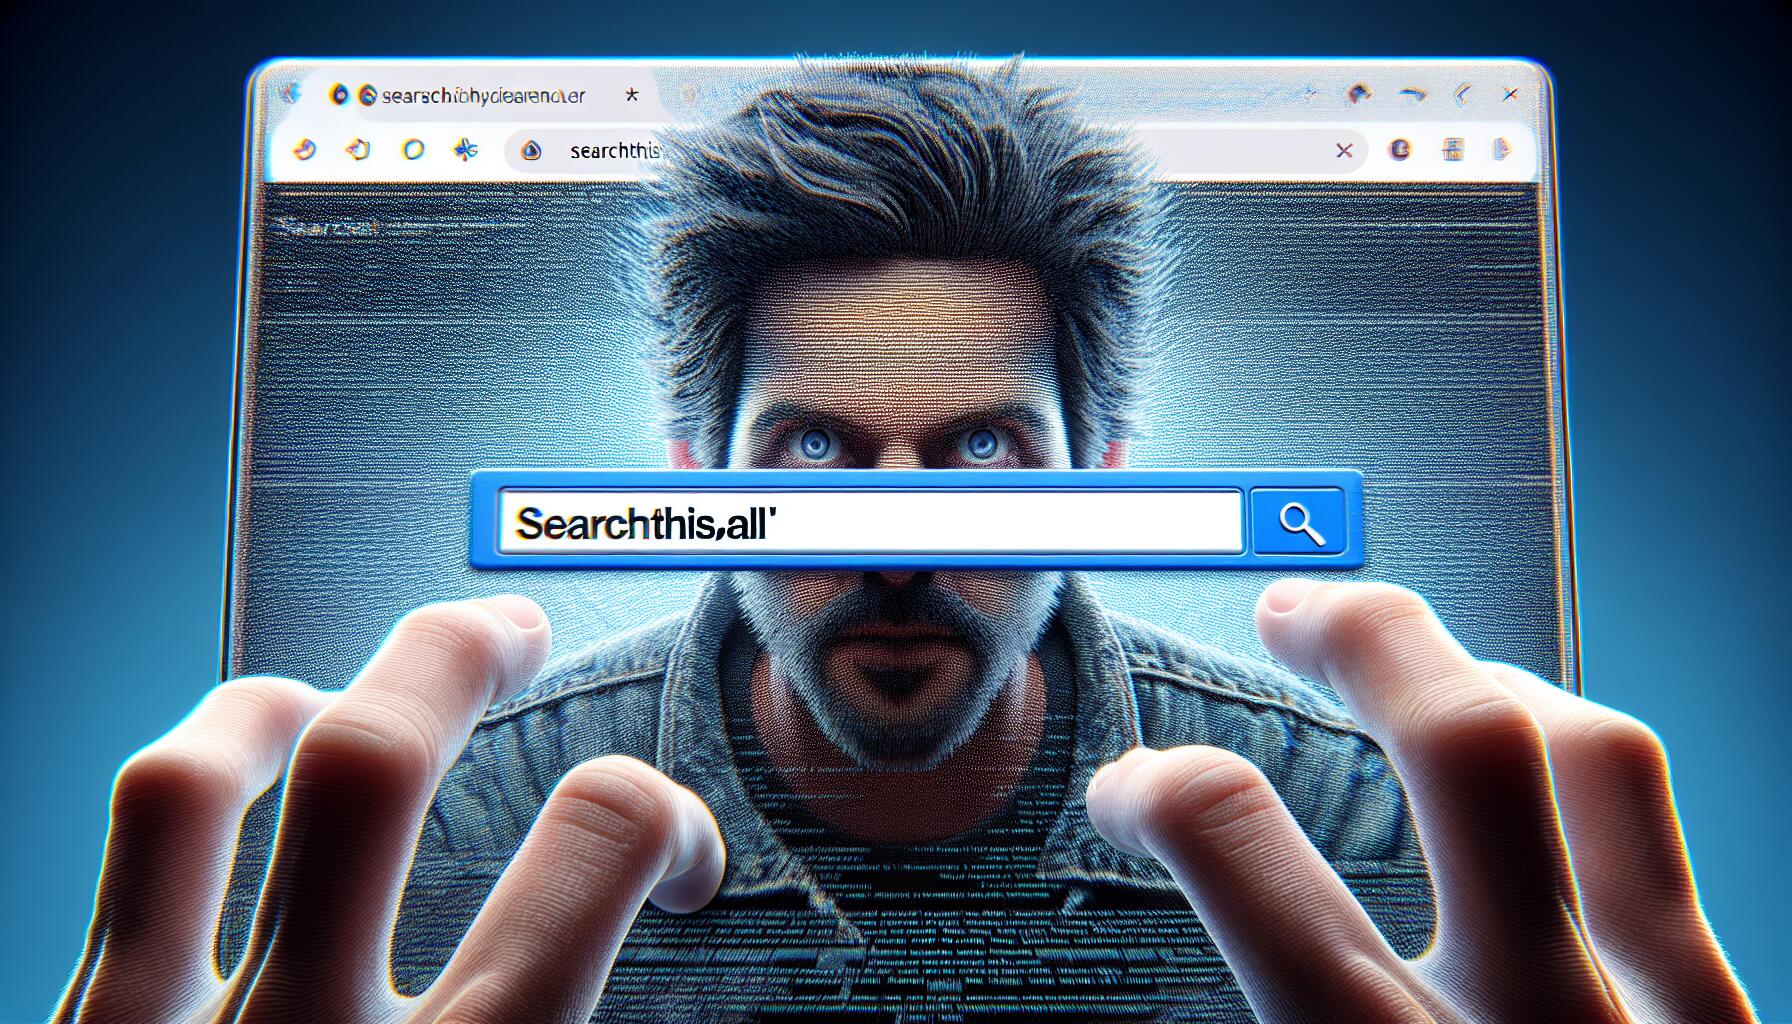 searchthisall